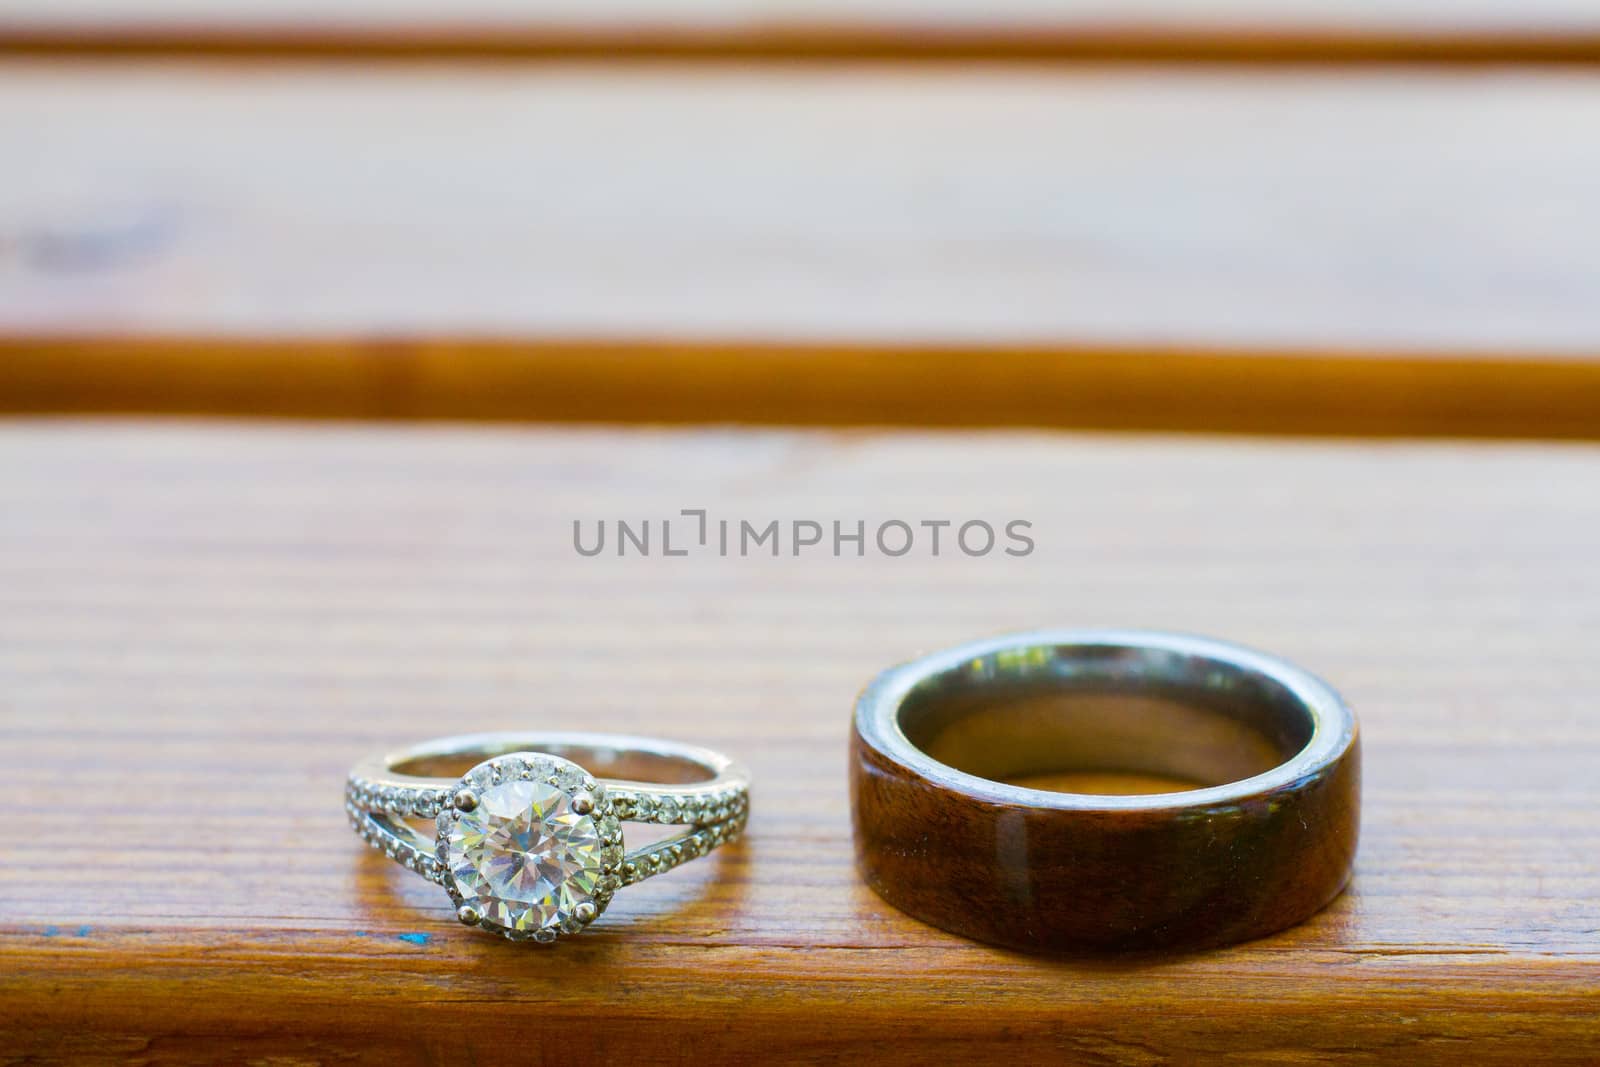 The rings of a bride and groom are photographed on a wooden bench.